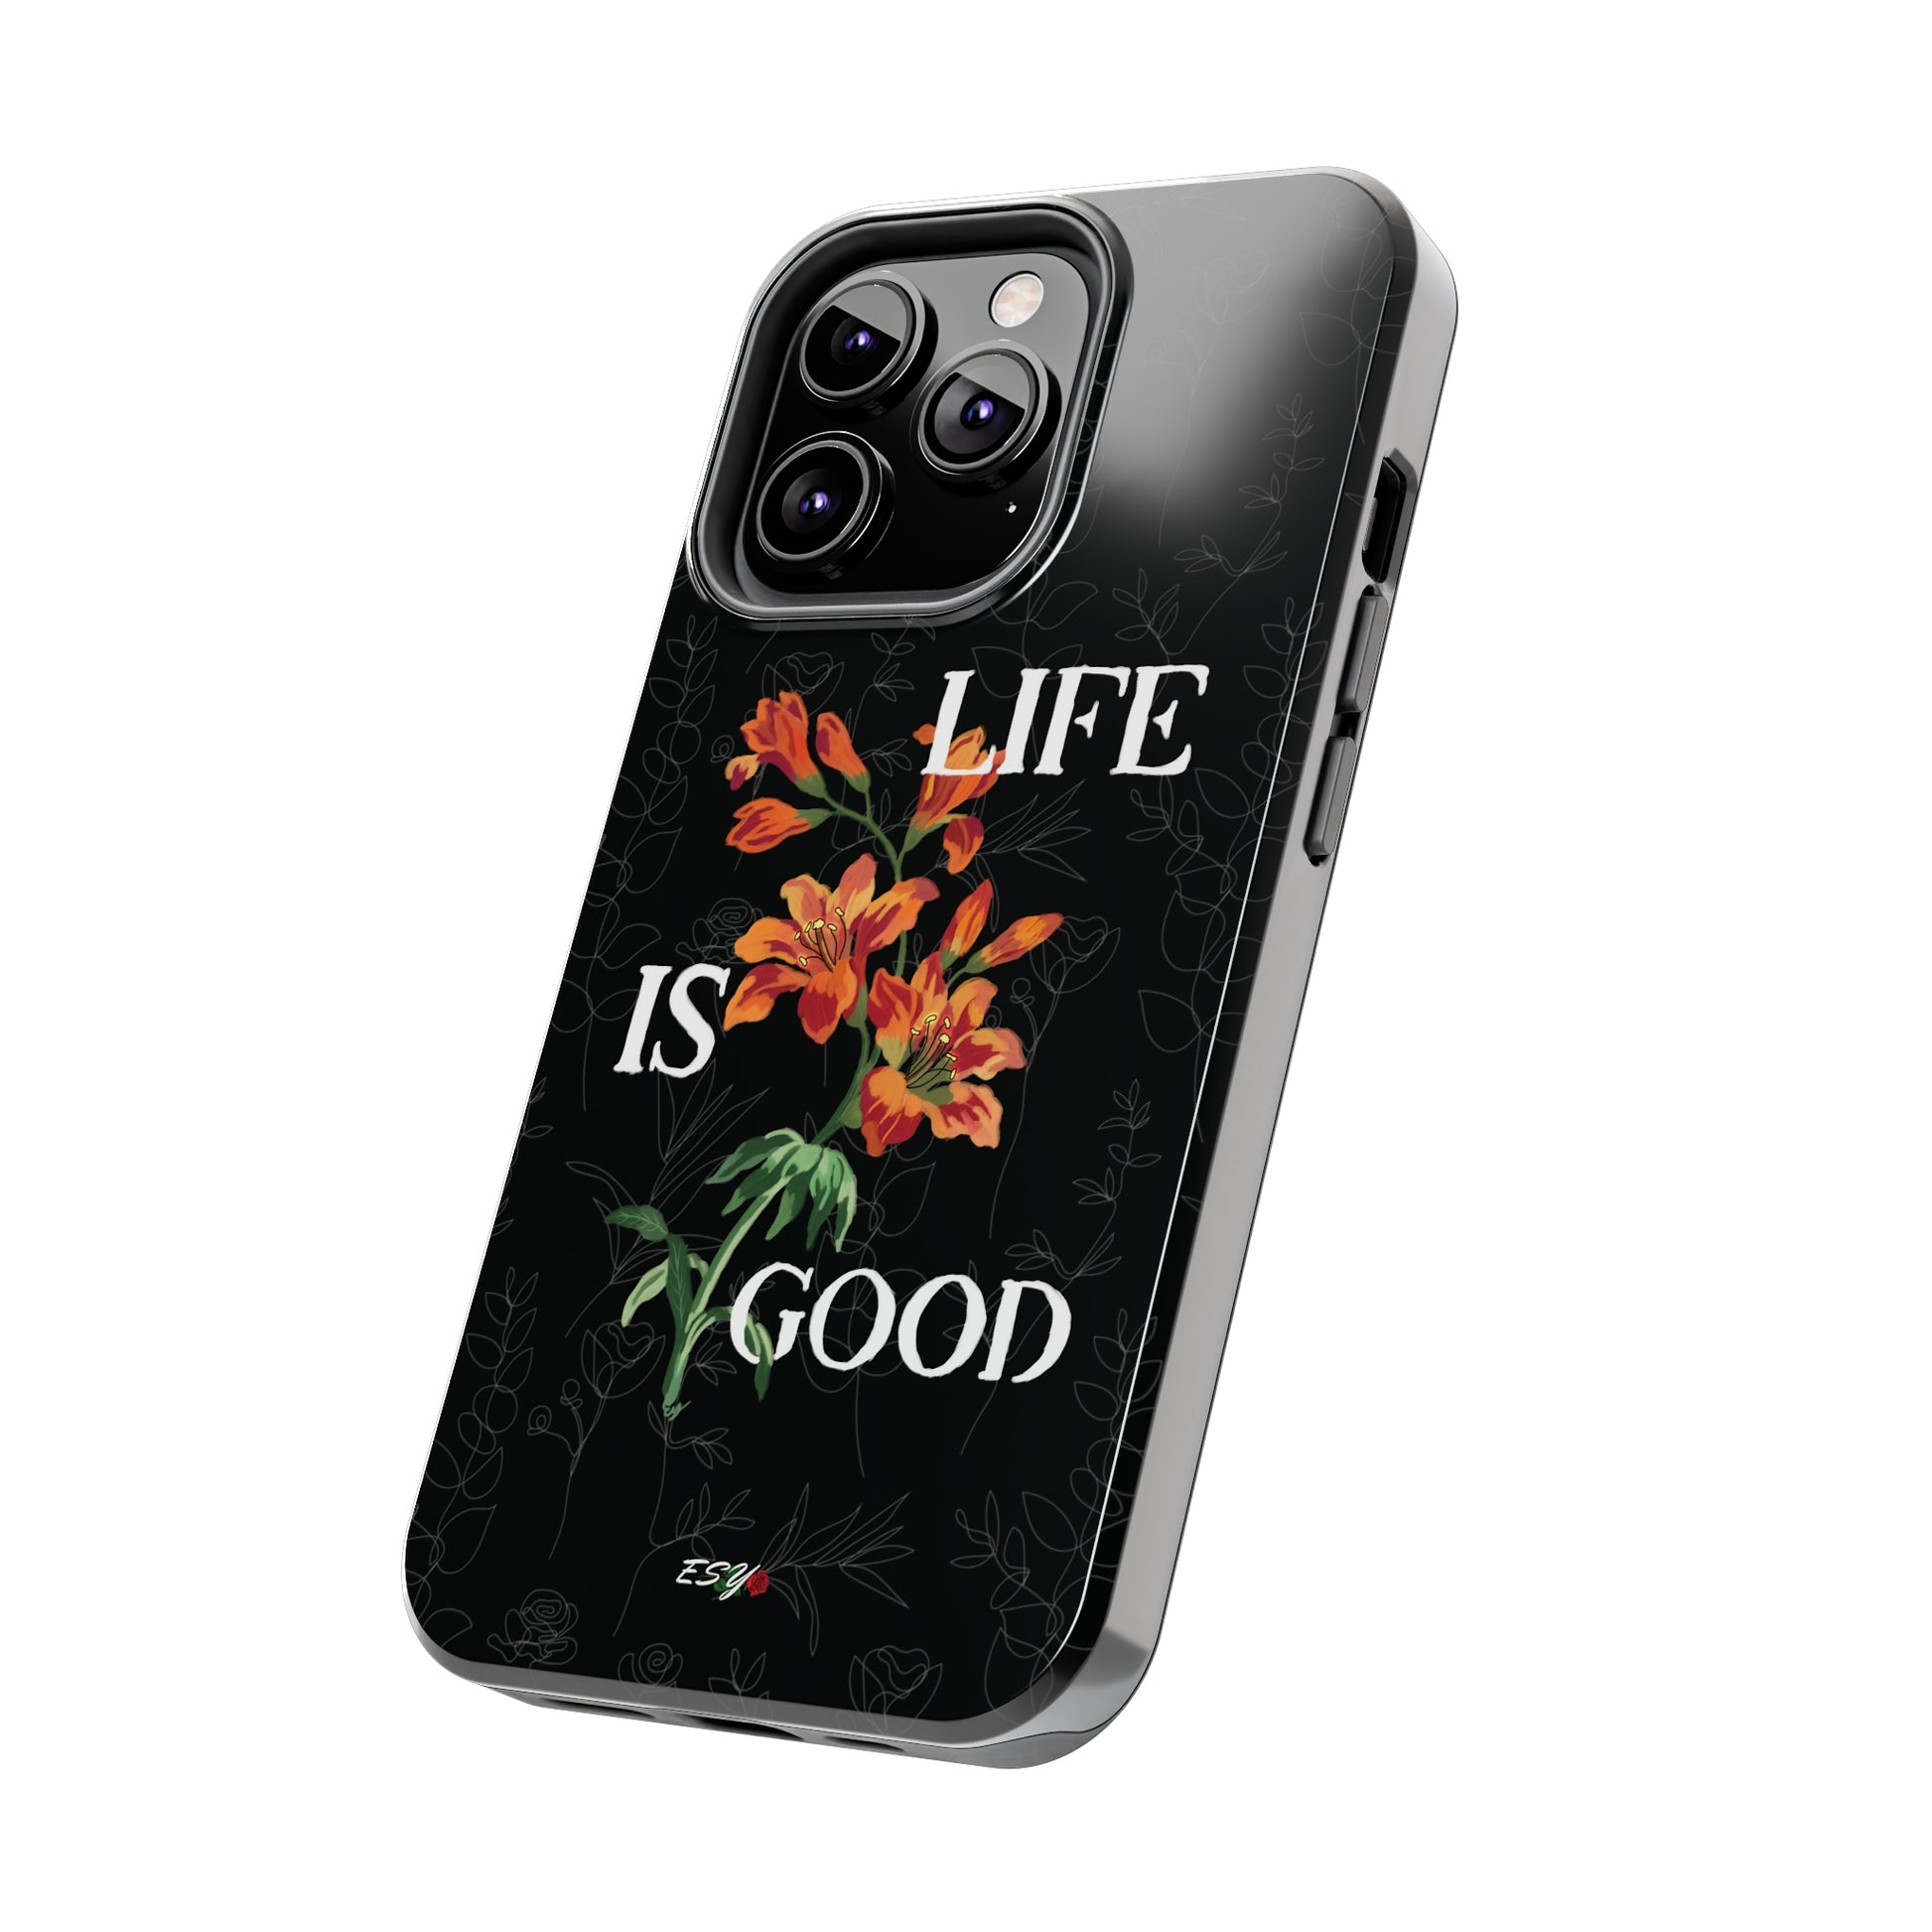 Life is good iphone case